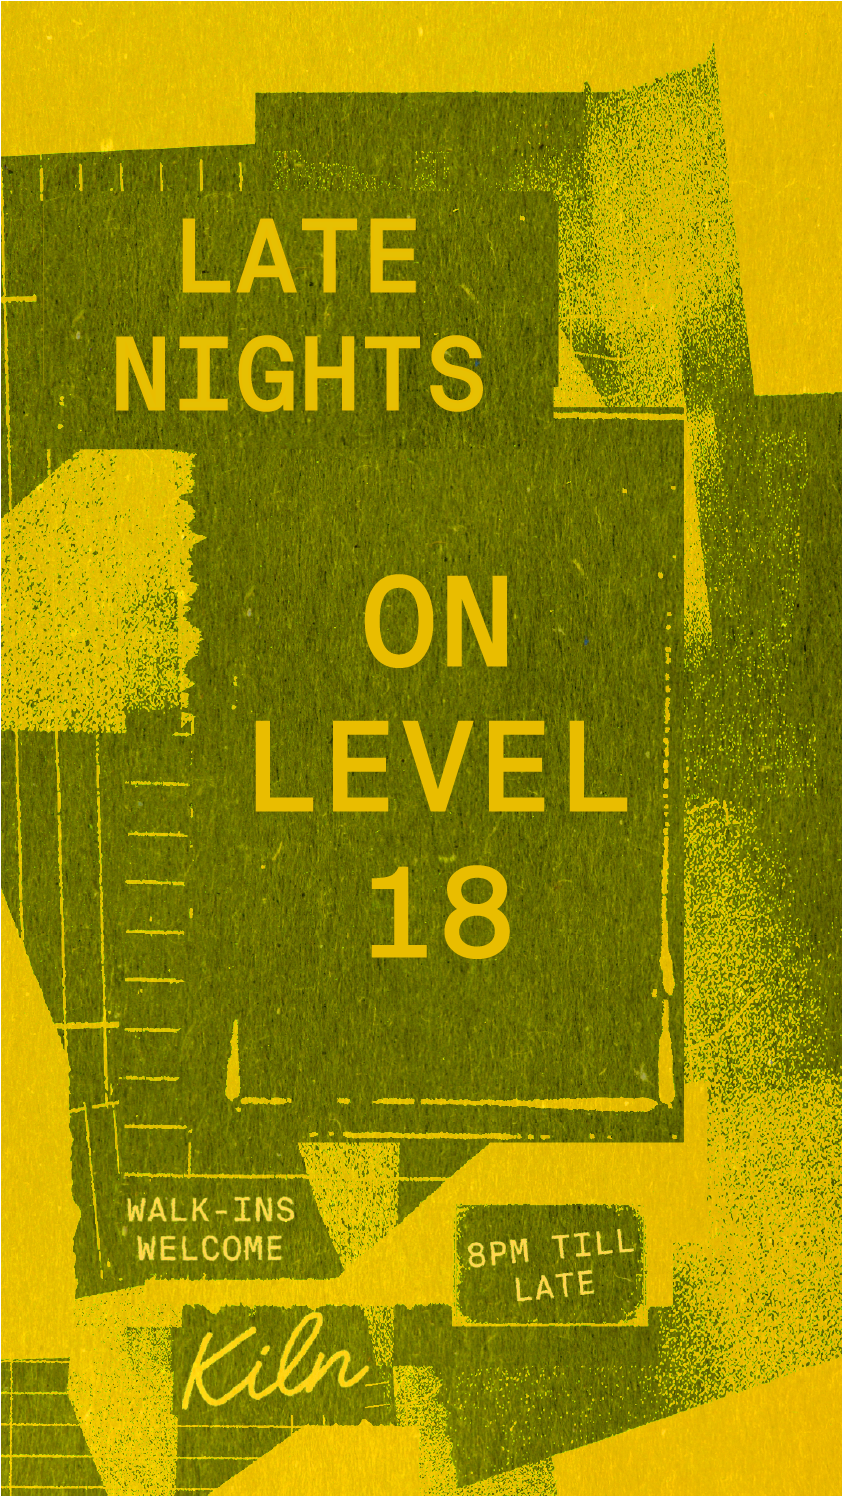 Late Nights on Level 18